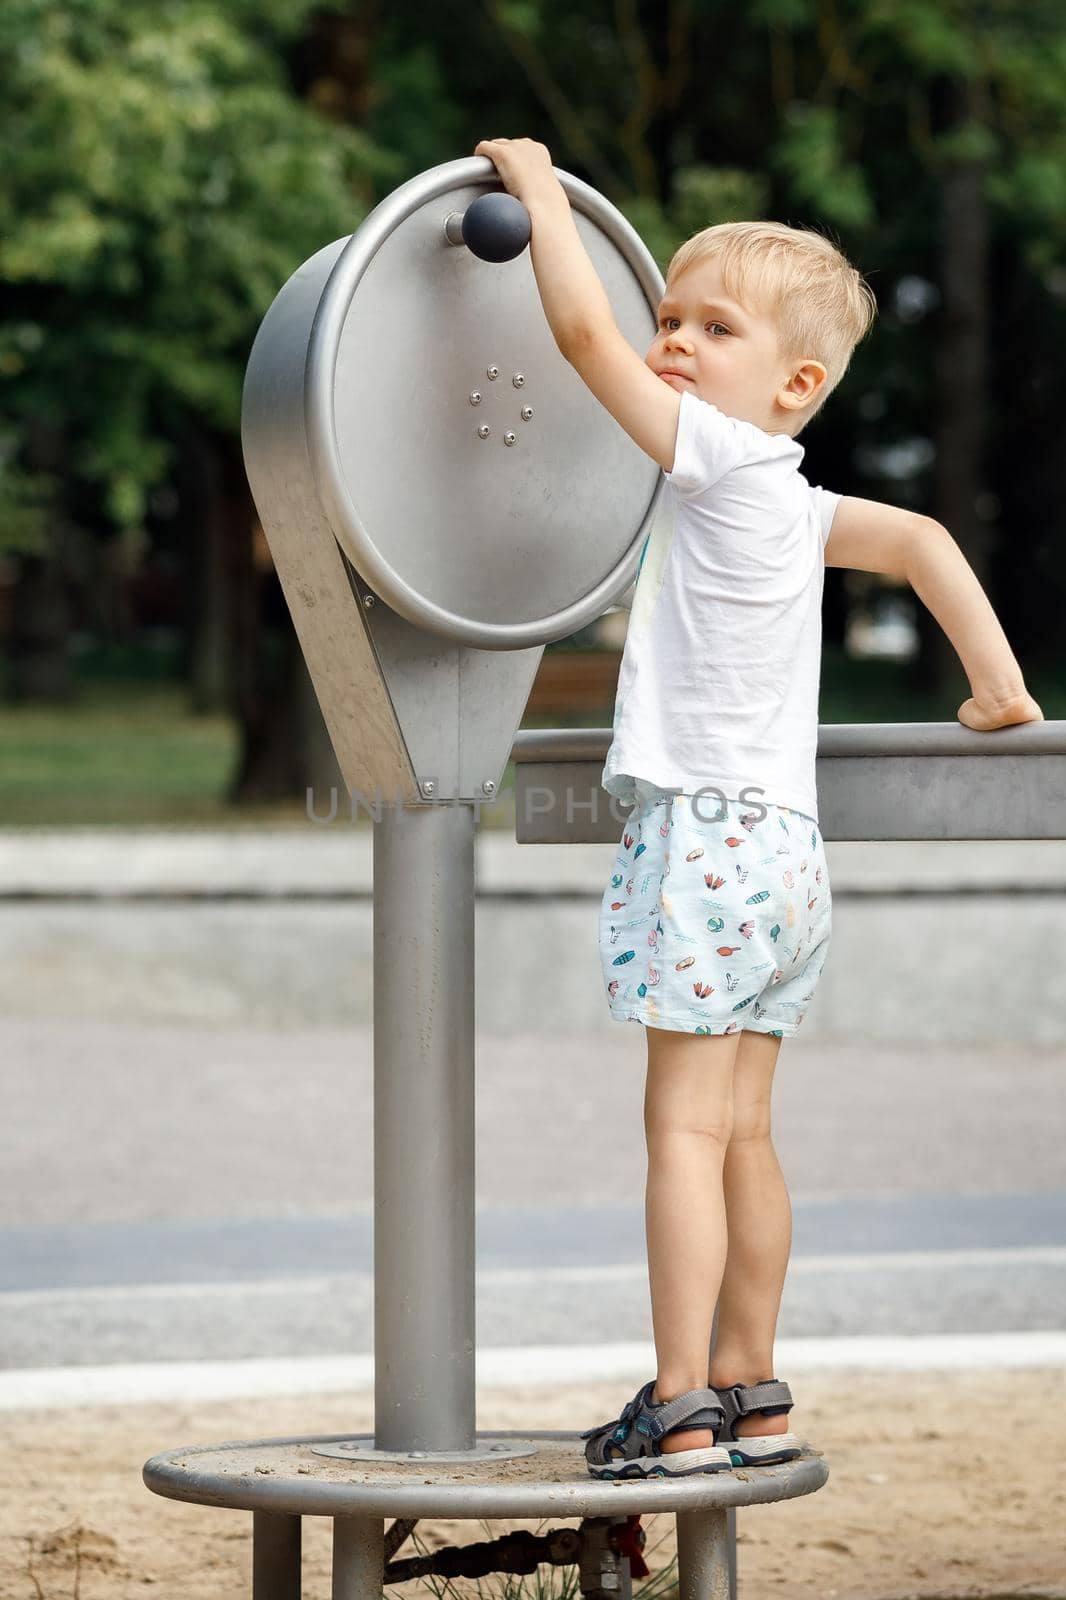 A little boy playing with a water pump in a city park.